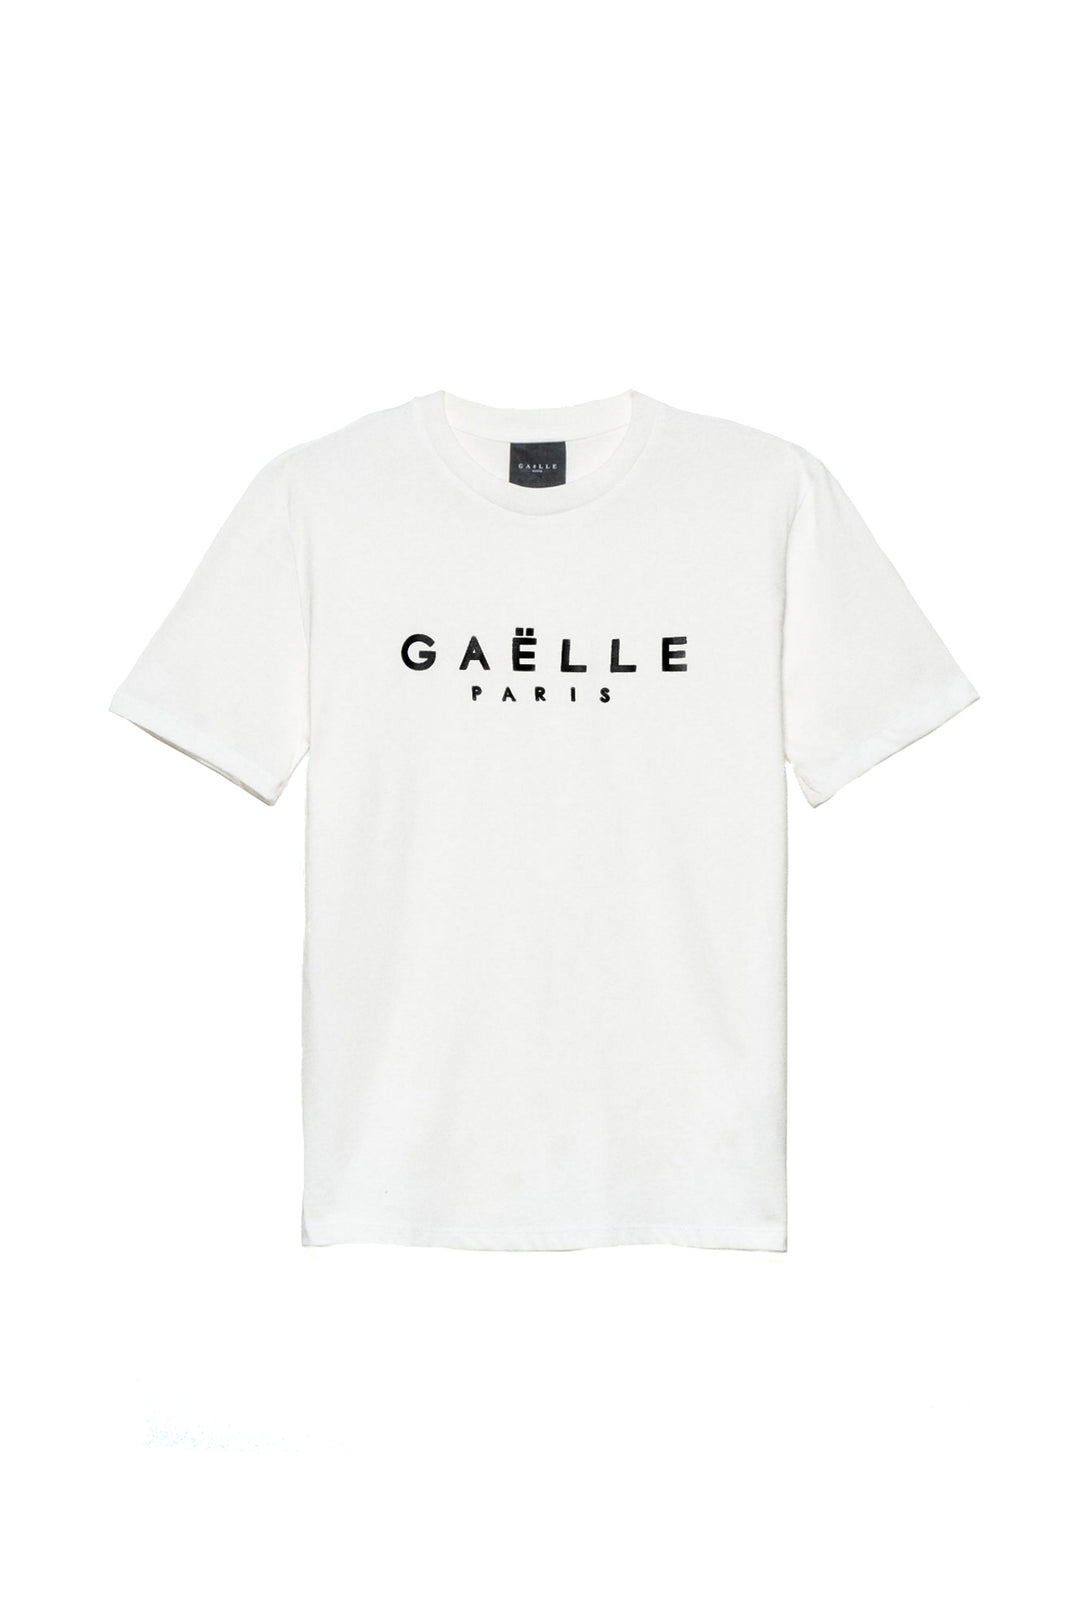 GAELLE T-Shirt Offwhite In Jersey Con Stampa - Mancinelli 1954